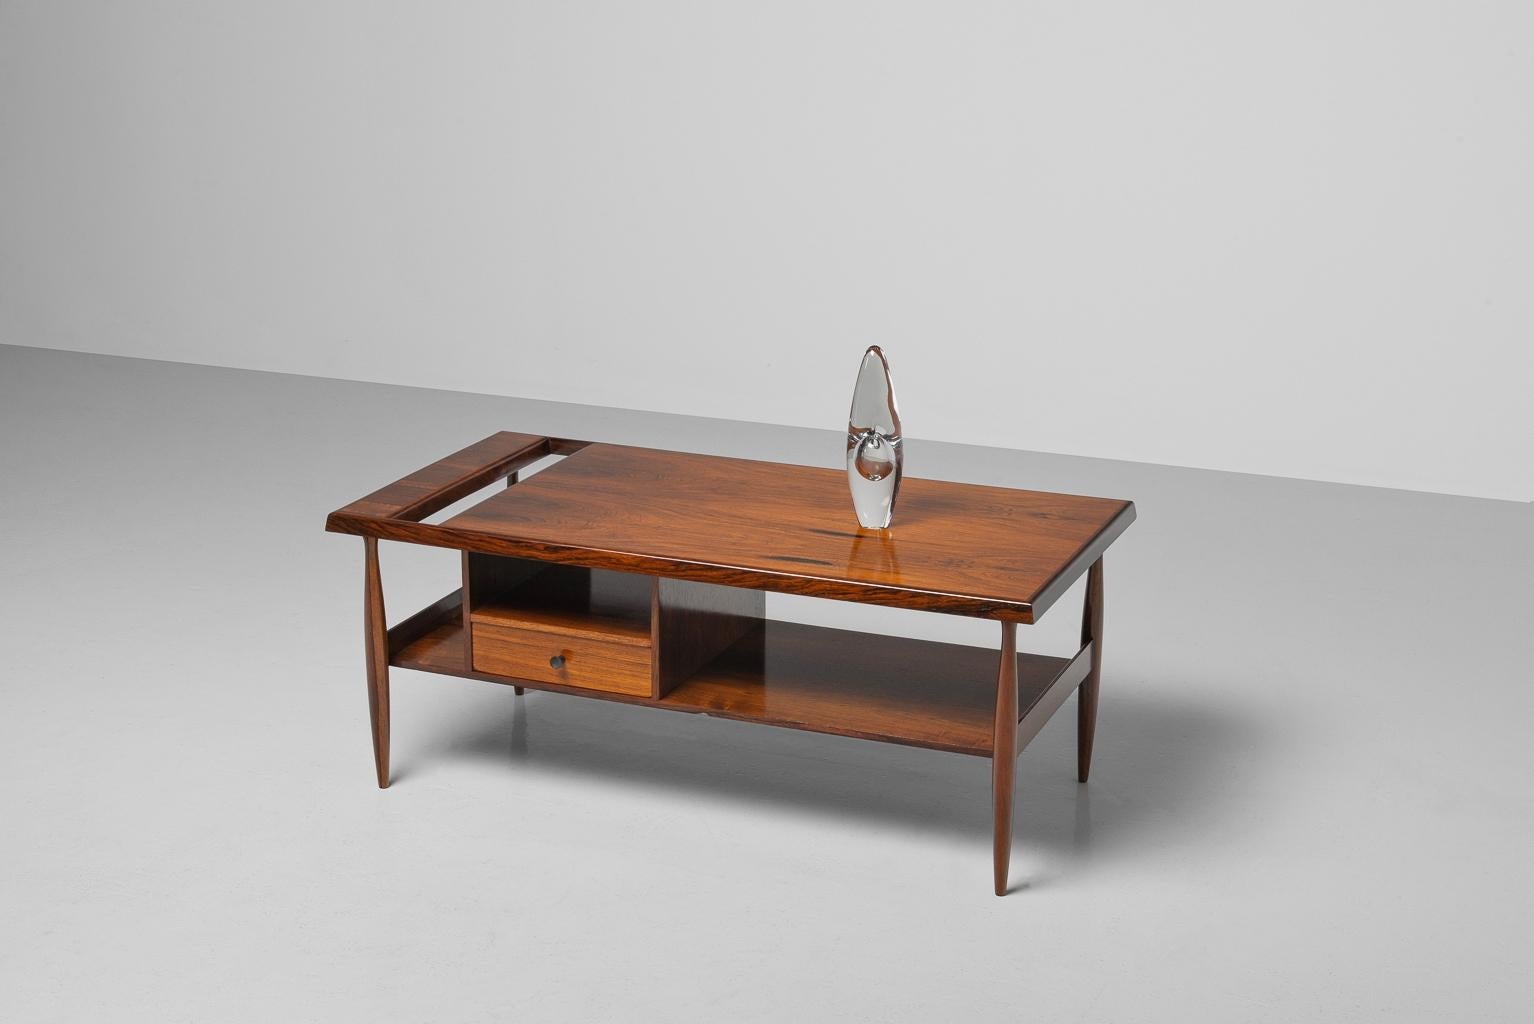 Carlo Hauner Martin Eisler coffee table by Forma Italy 1955 In Good Condition For Sale In Roosendaal, Noord Brabant